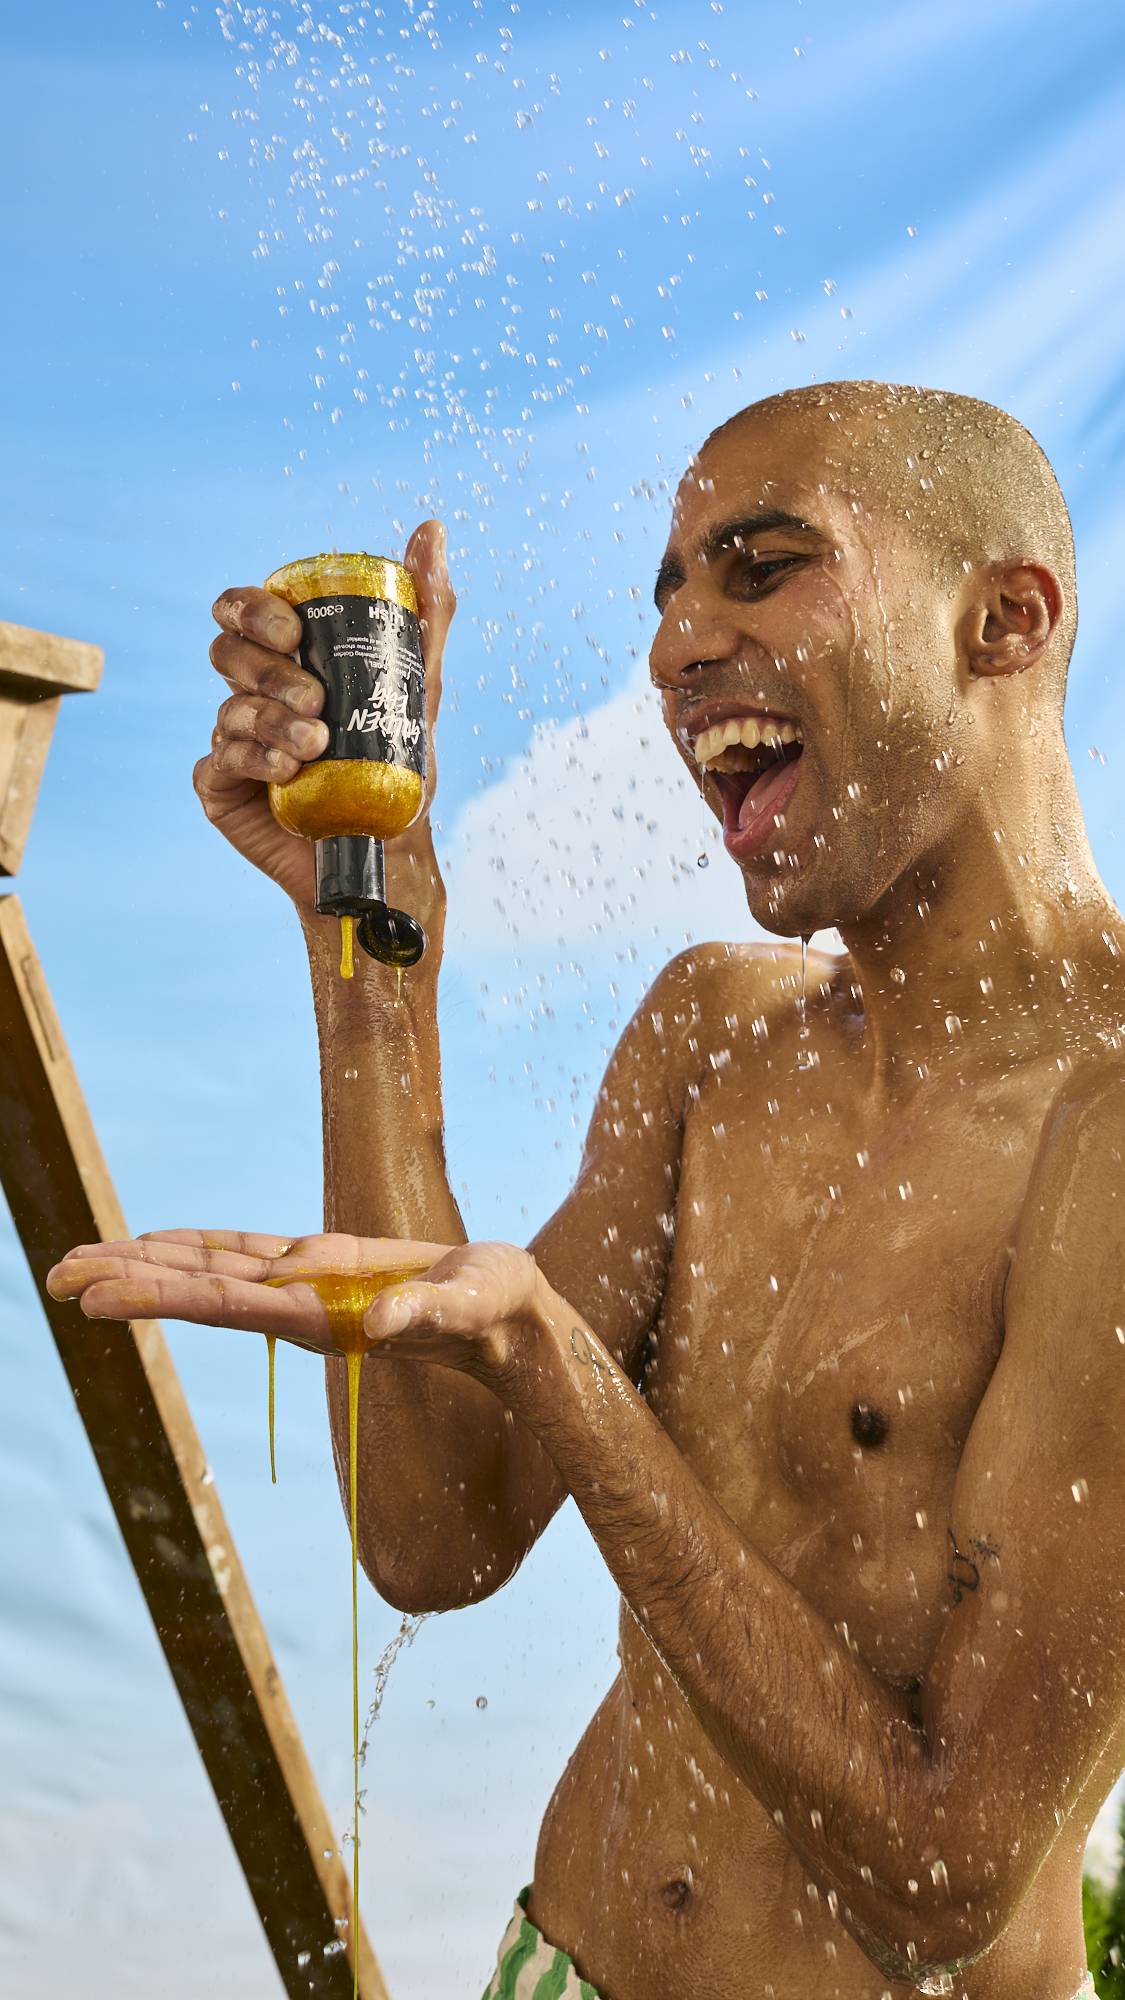 The model is standing under an outdoor shower under a bright blue sky as they are generously squeezing the golden, glittery shower gel into their palm. 